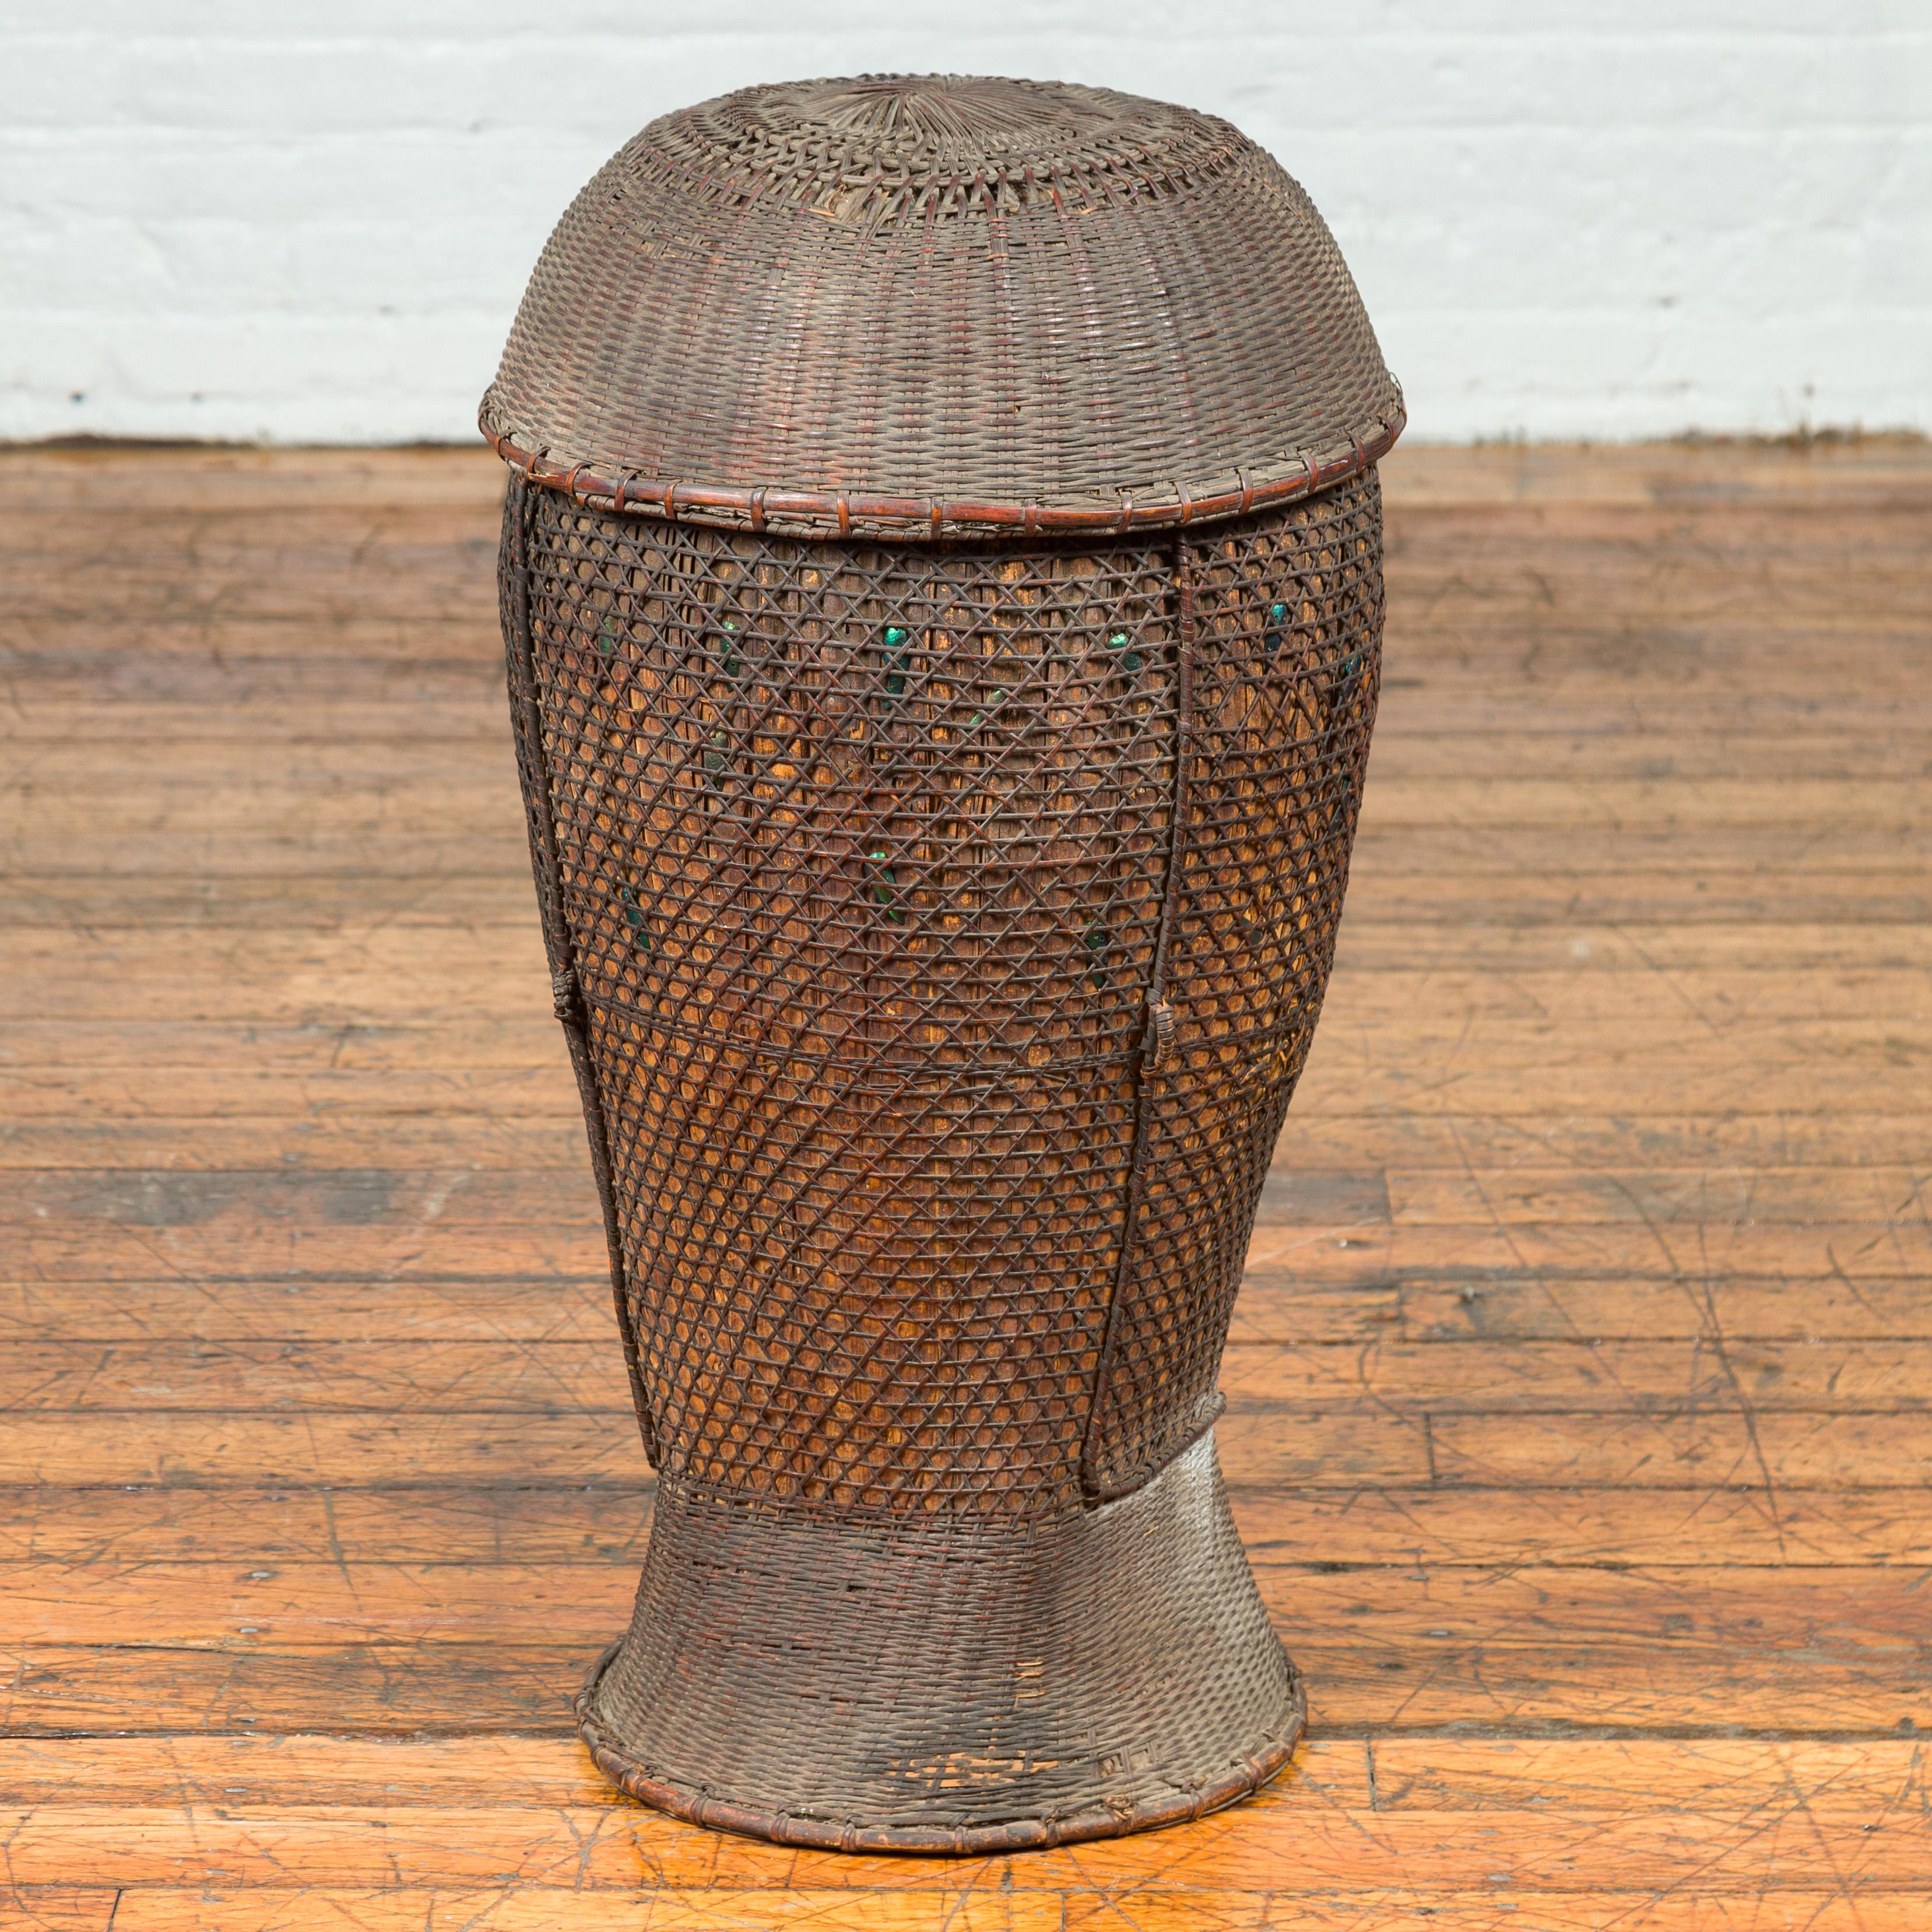 An antique farmer's grain basket from the 19th century, with cylindrical silhouette, iridescent motifs and lid. This 19th-century antique farmer's grain basket from the Philippines is an embodiment of rustic charm and utilitarian history. The basket